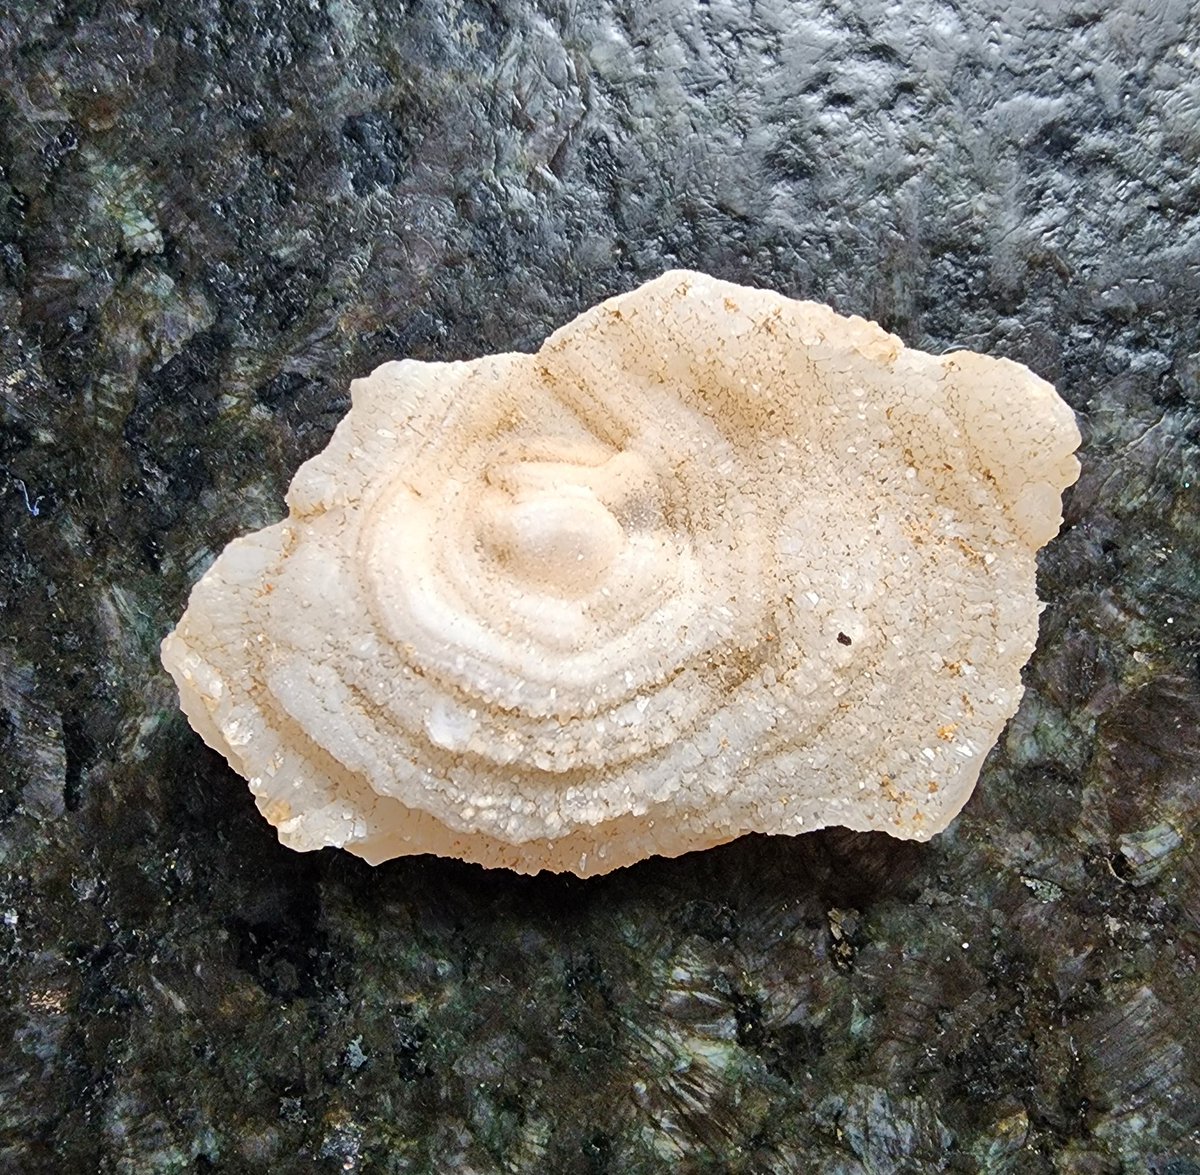 A chalcedony rose we found in the Mojave desert on one of our camping trips.